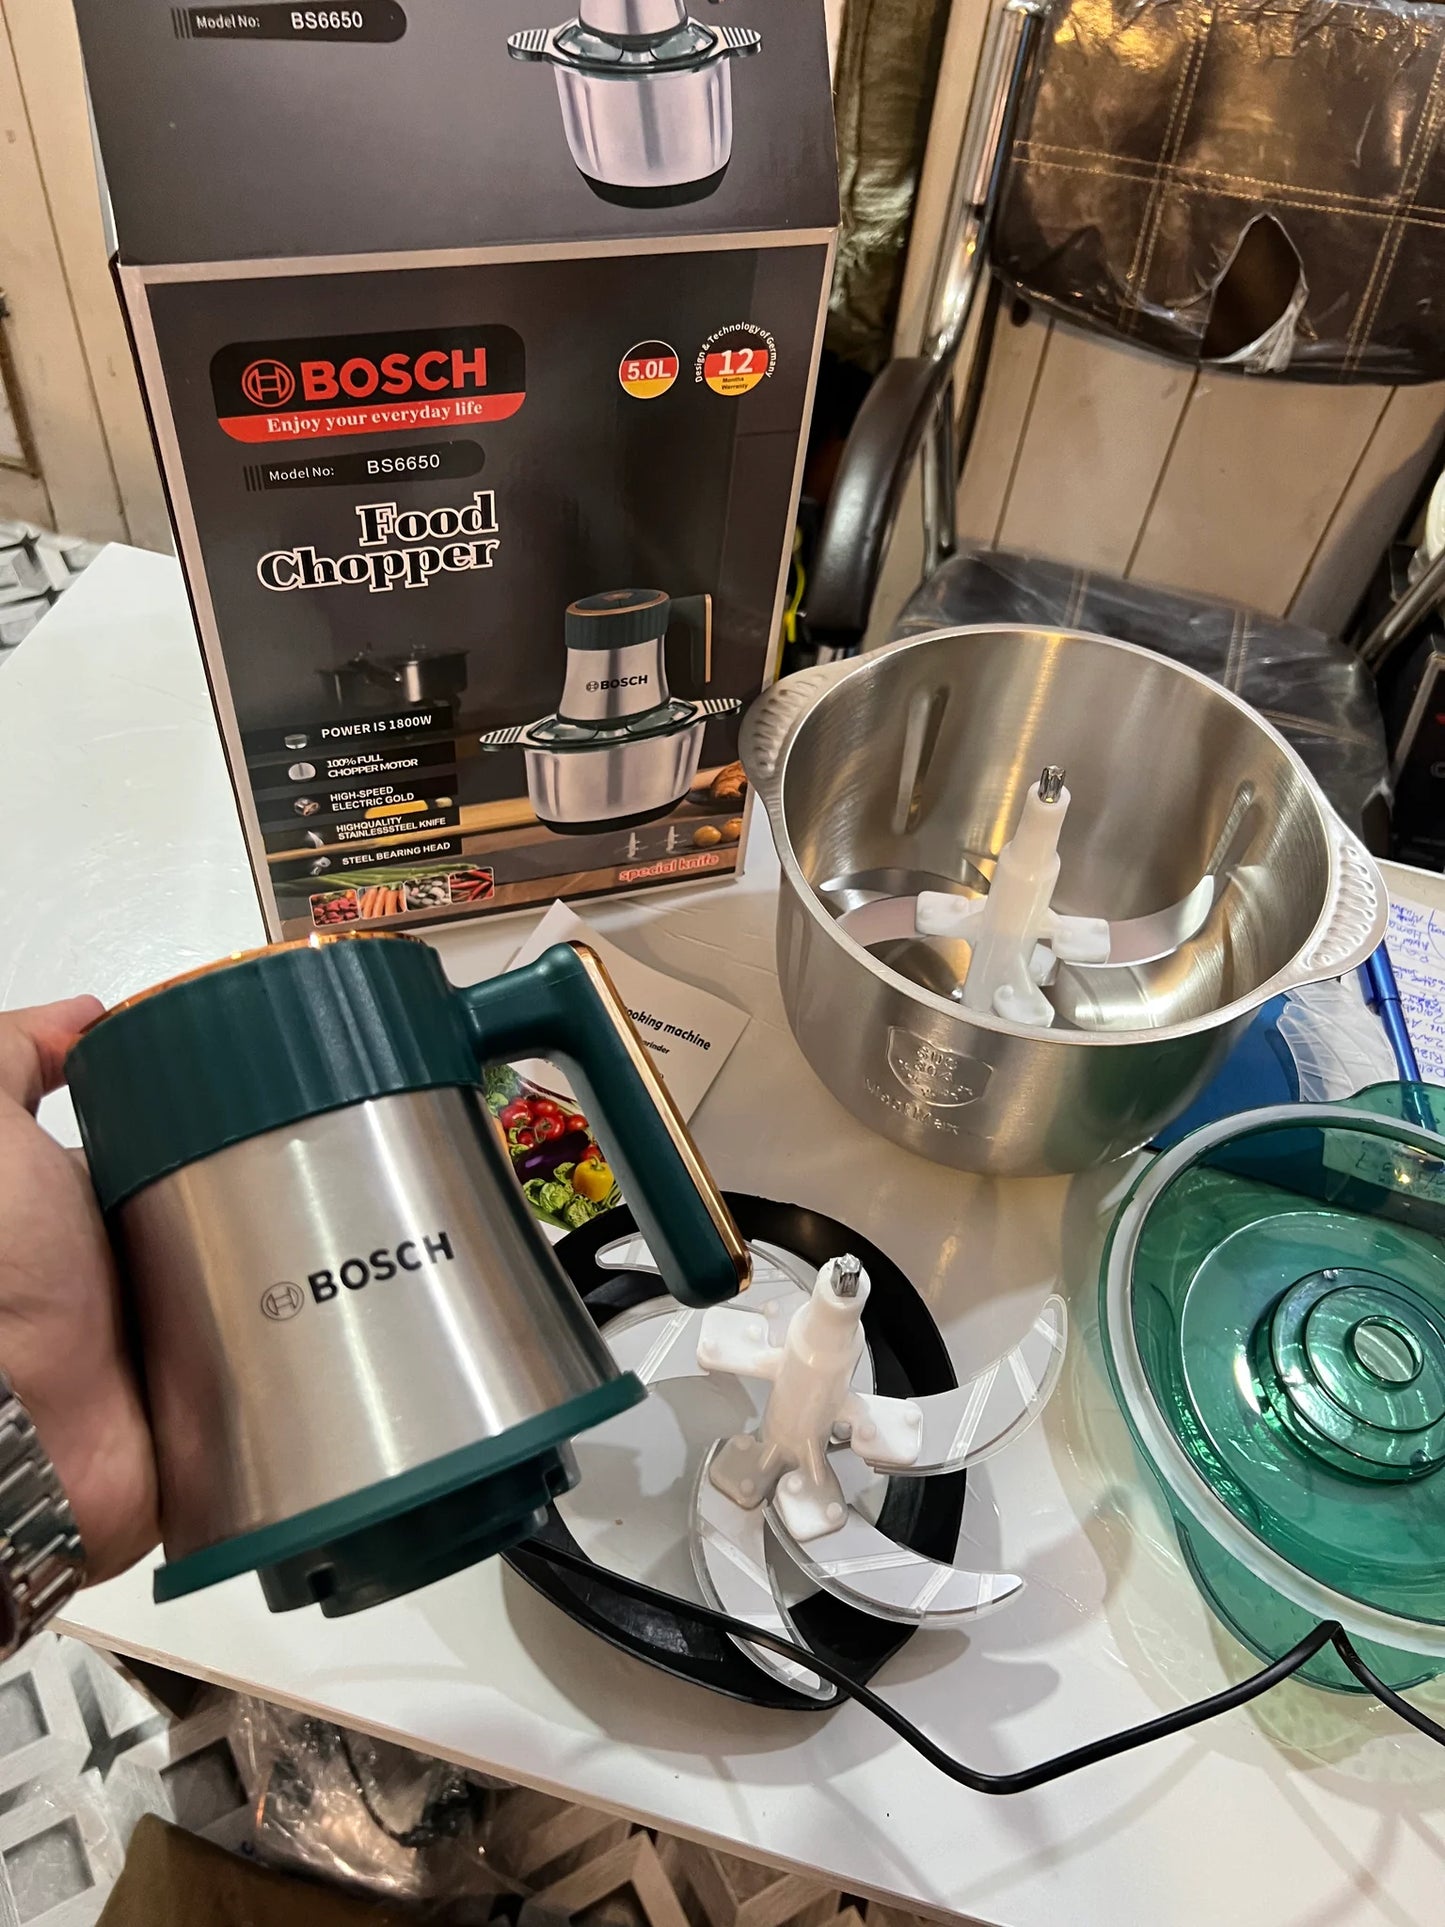 Lot Imported 5L BOSCH brand Meat and Vegetable Chopper LOT IMPORTED 5L BOSCH BRAND MEAT AND VEGETABLE CHOPPER